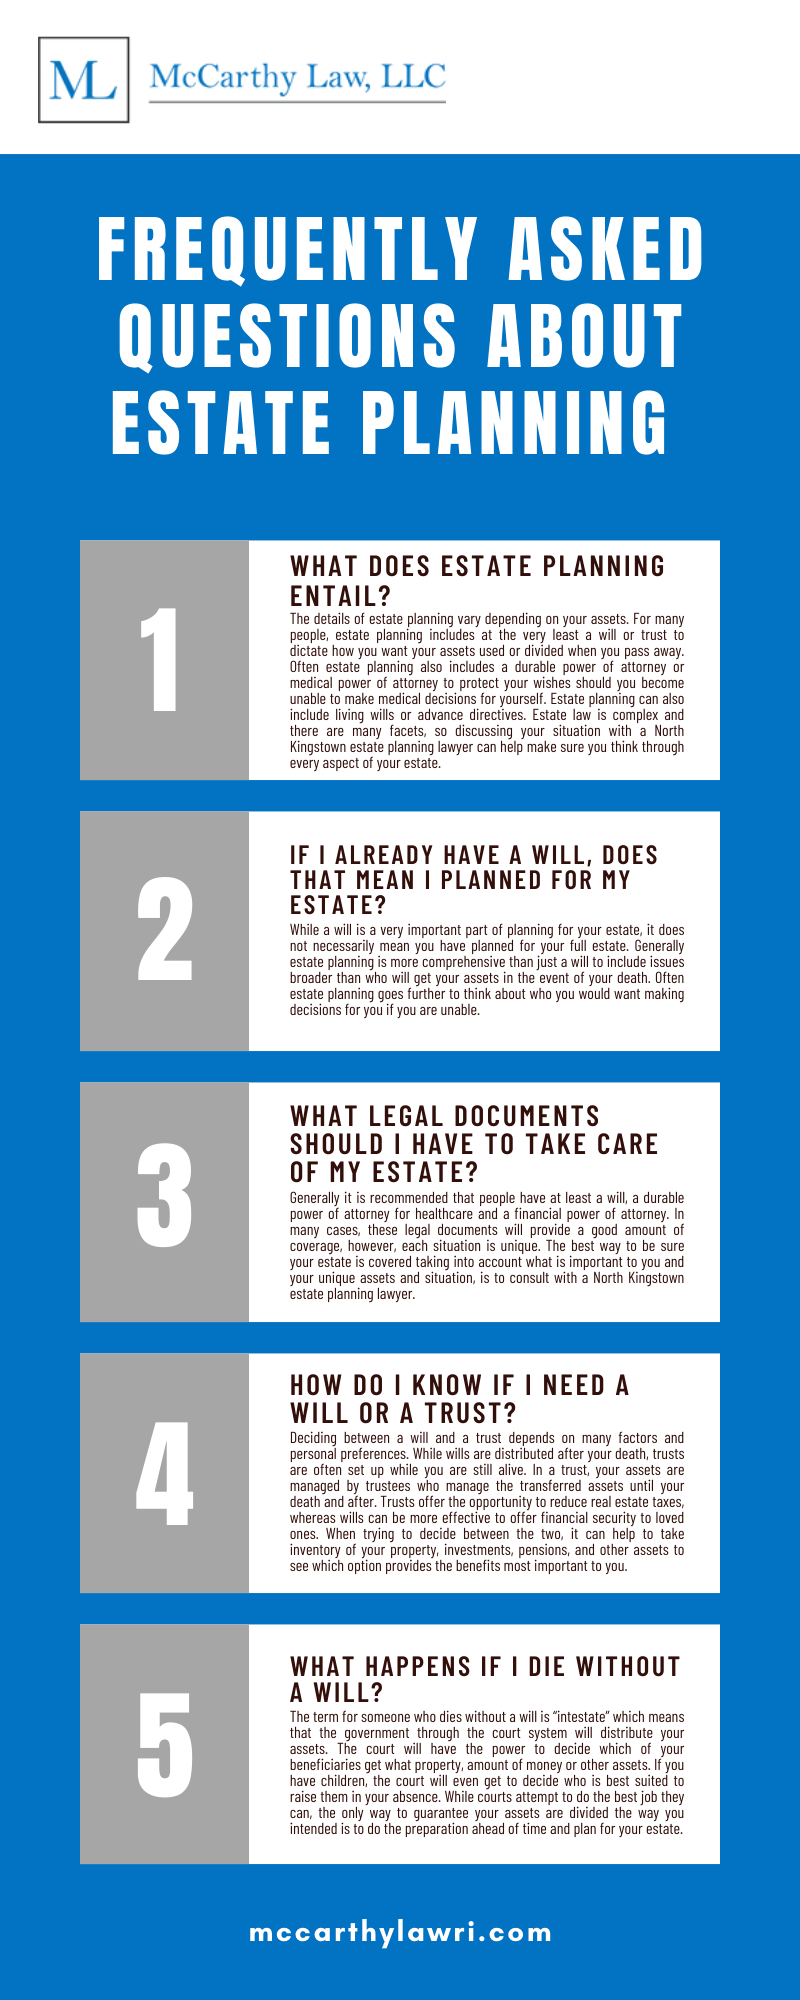 FREQUENTLY ASKED QUESTIONS ABOUT ESTATE PLANNING INFOGRAPHIC